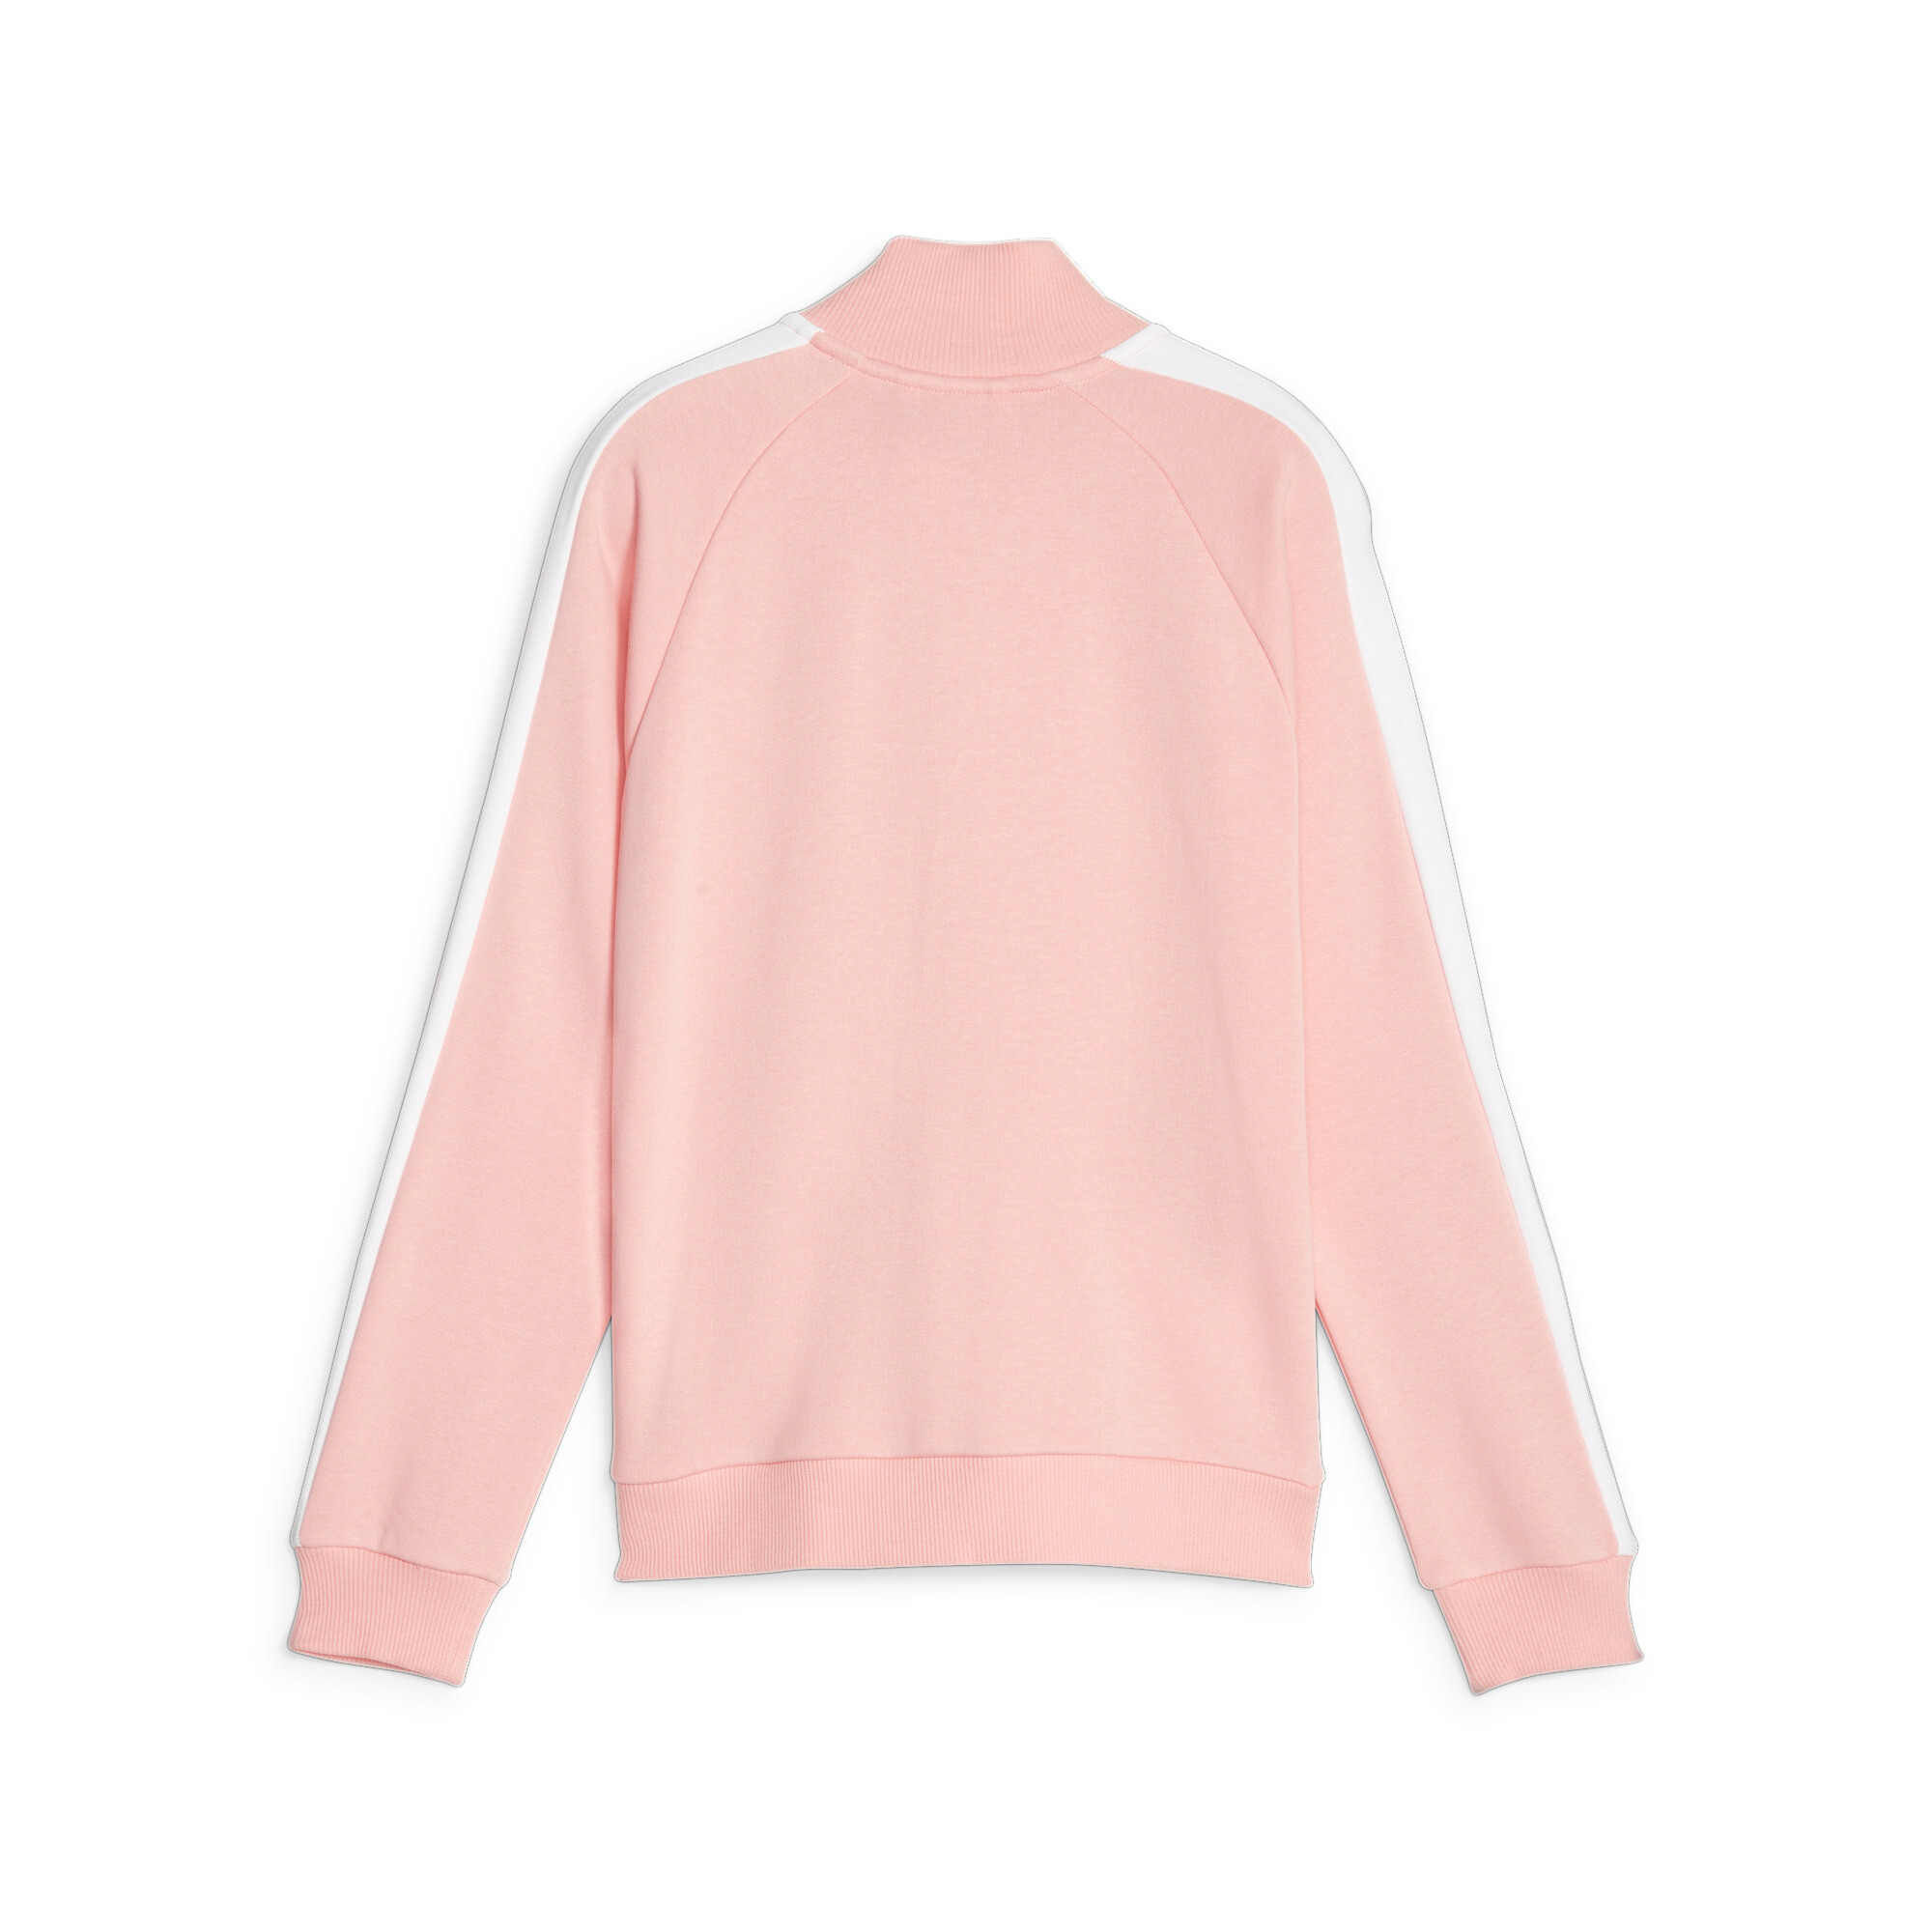 PUMA Classics T7 Track Jacket In Pink, Size 7-8 Youth